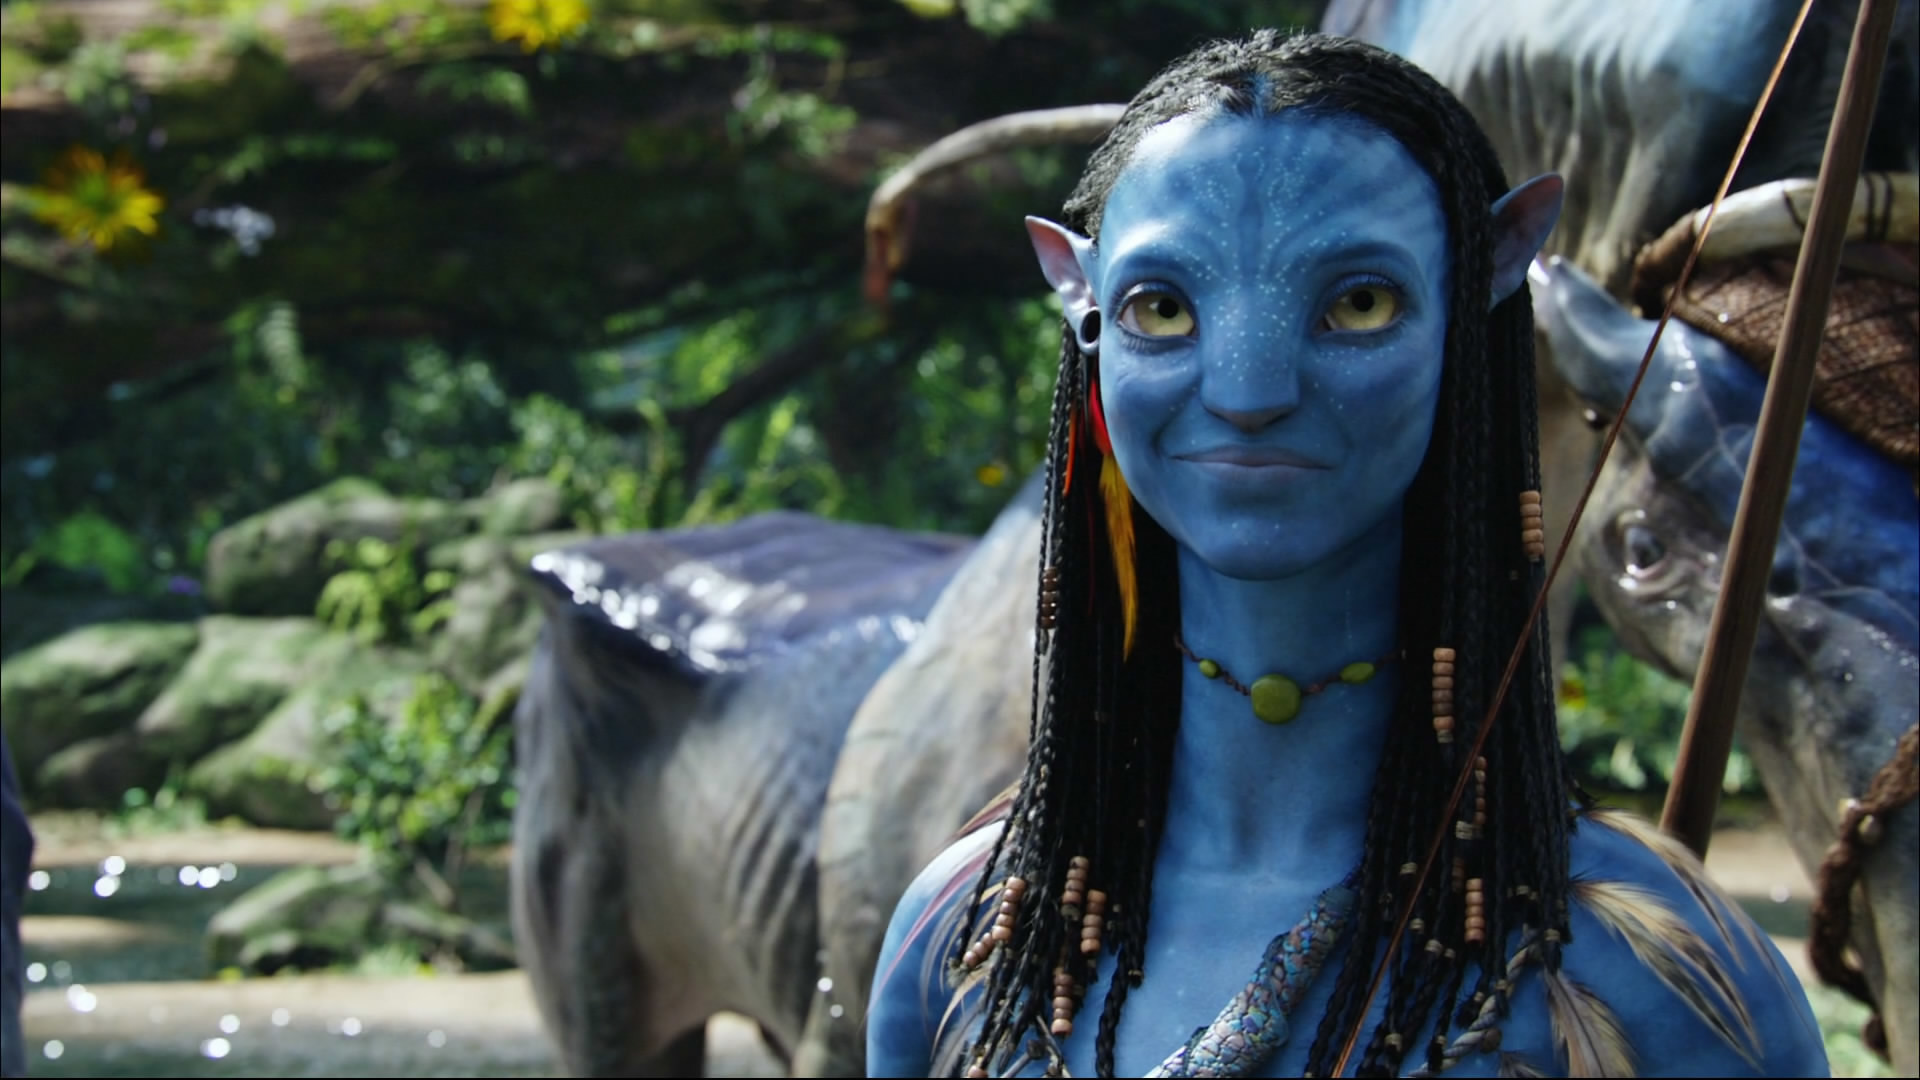 1920x1080 Collection of Avatar Movie Hd Wallpapers on HDWallpapers